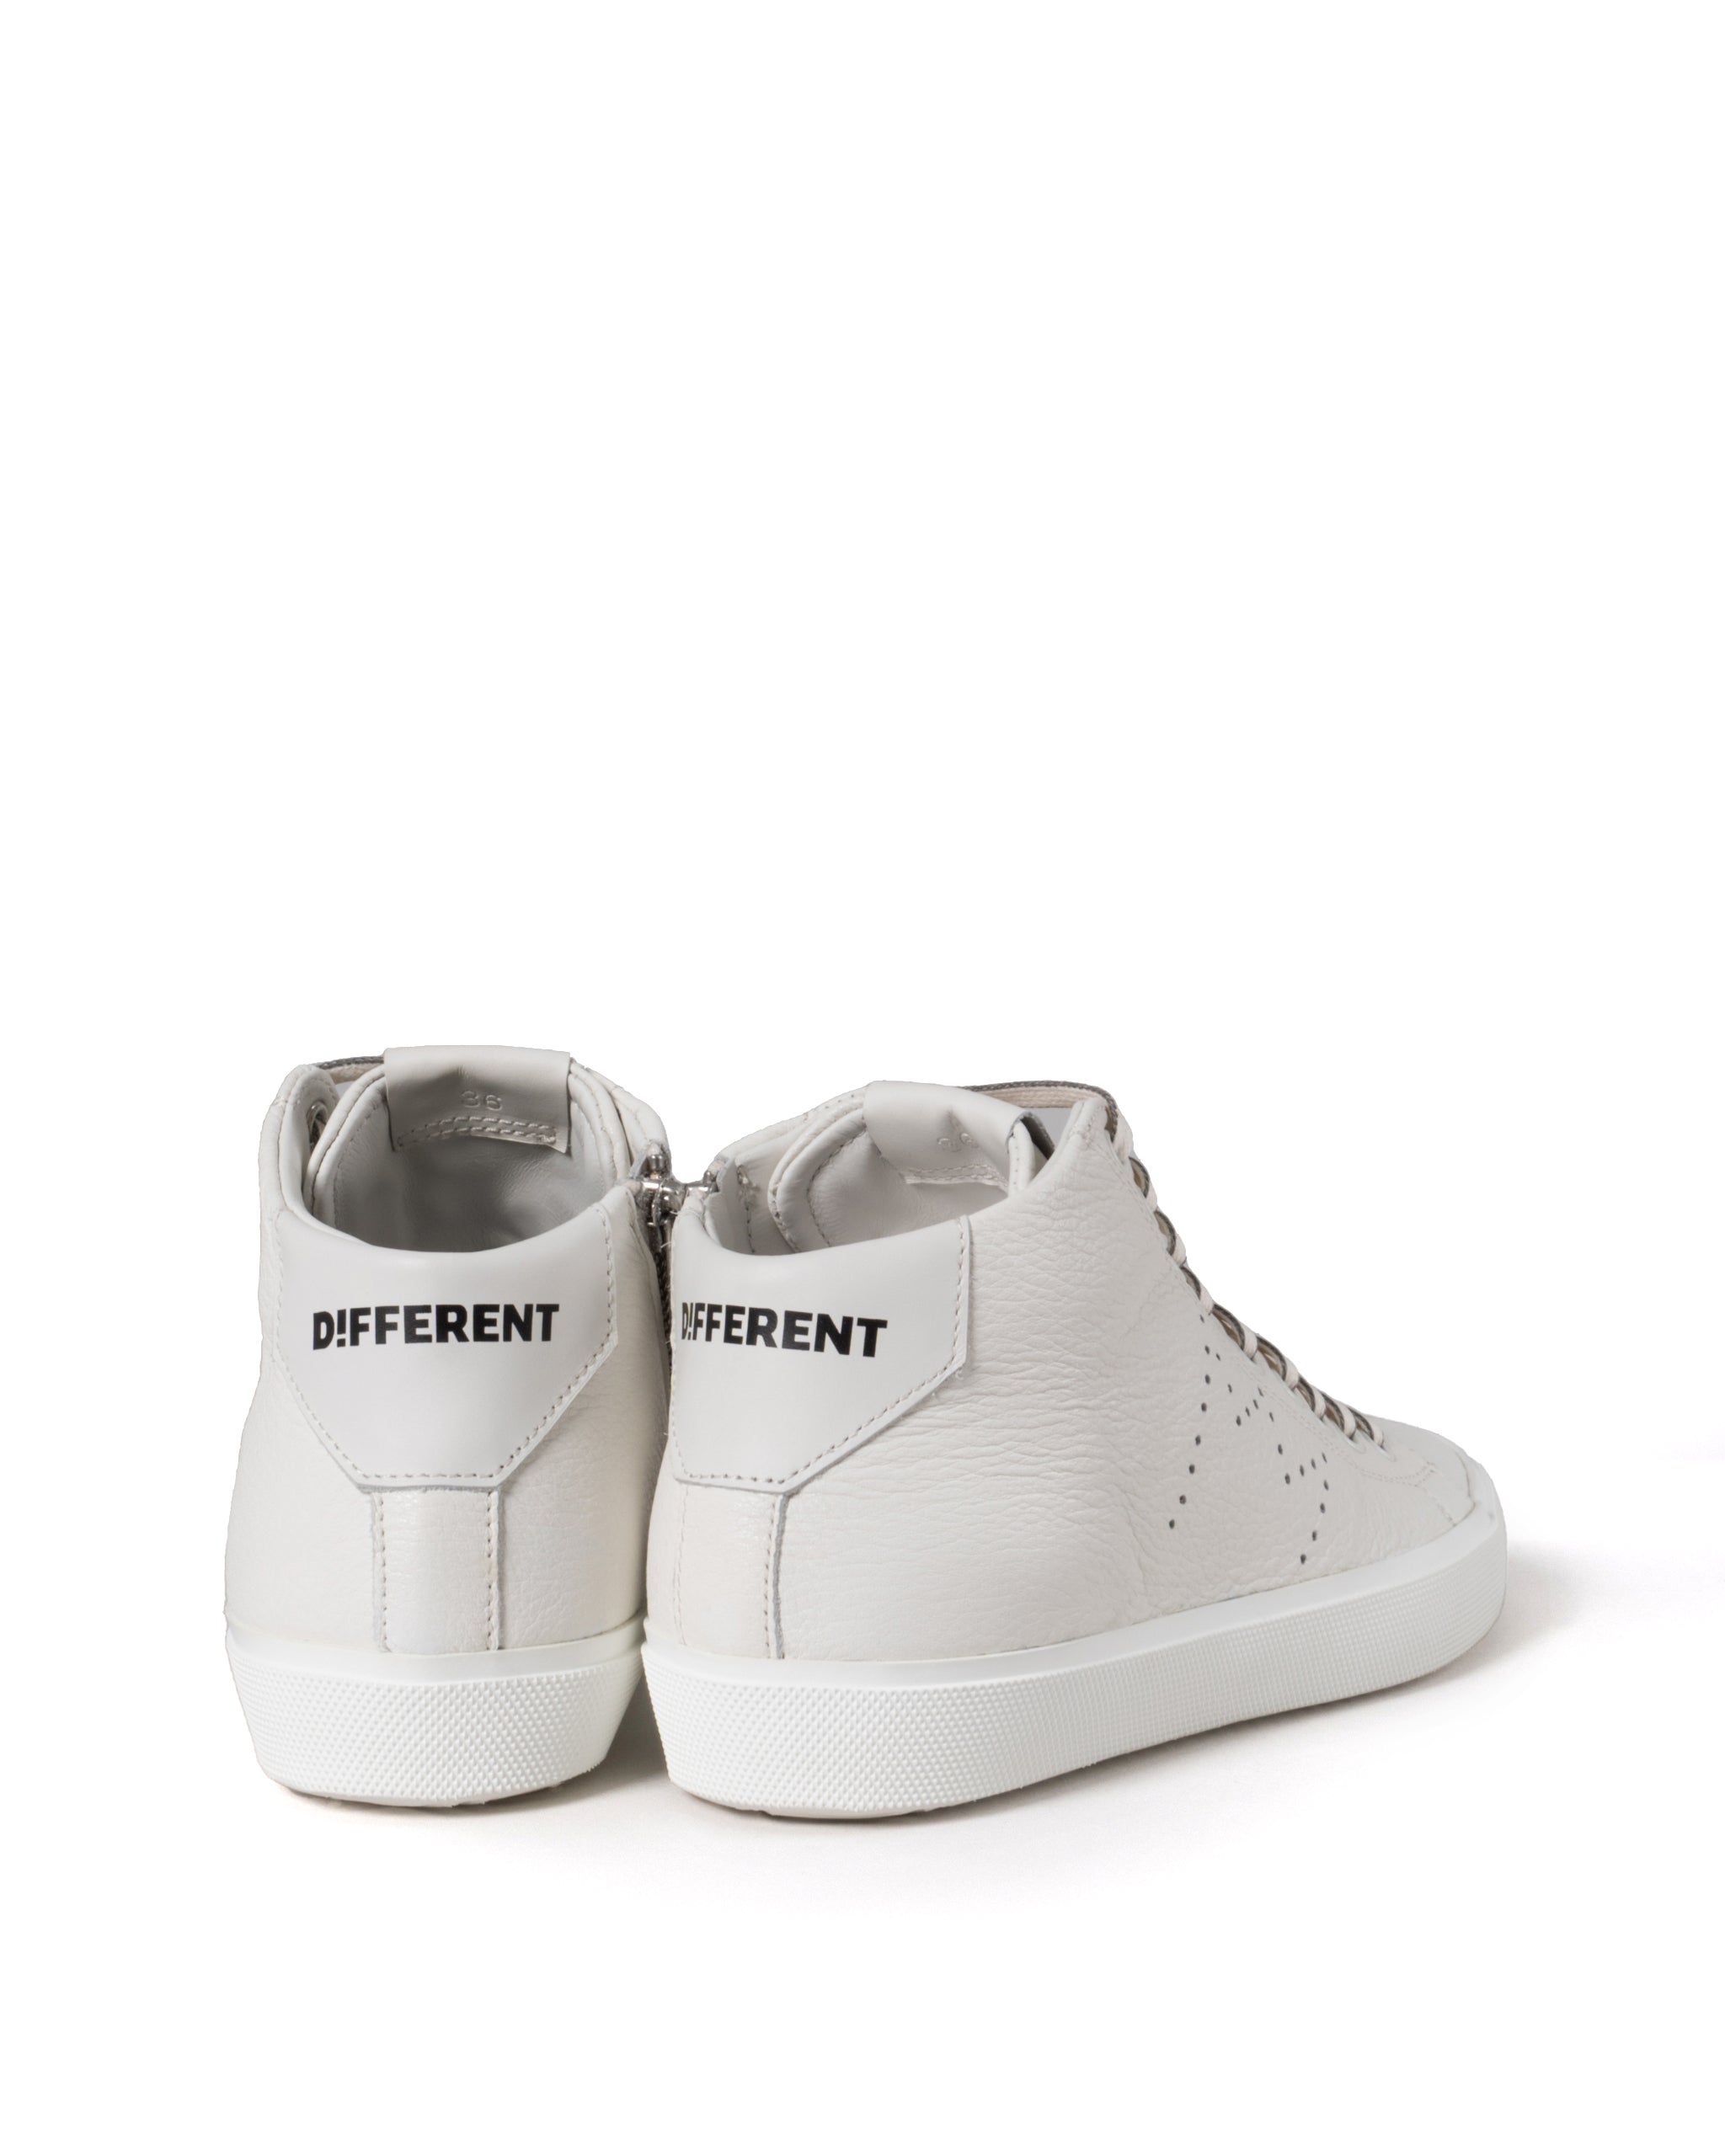 D!FFERENT LIMITED EDITION HIGH TOP